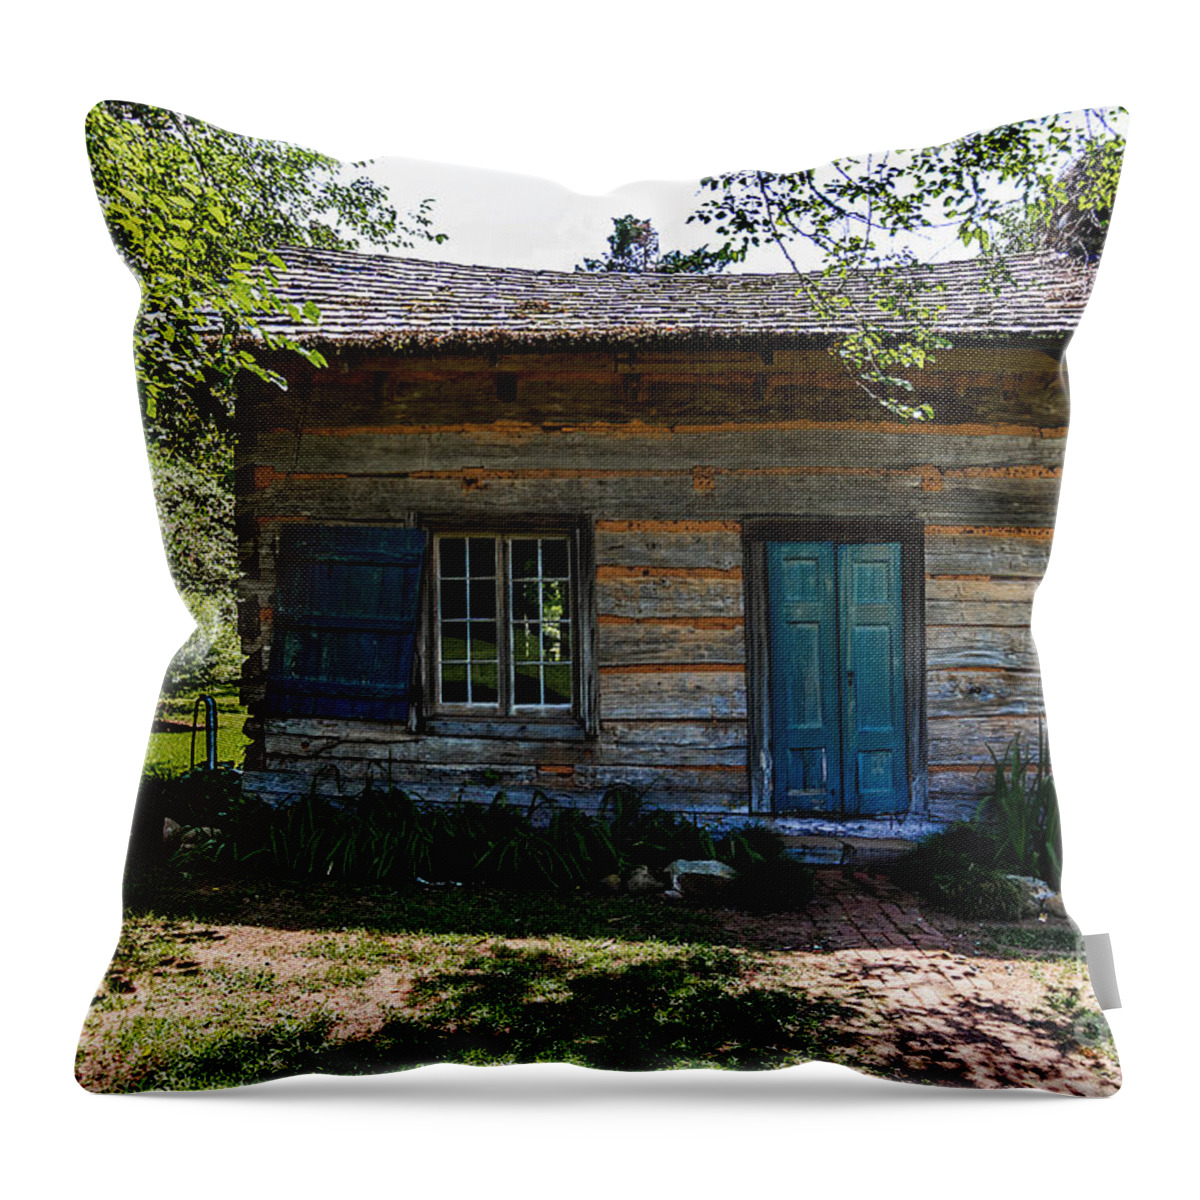 Heritage Site Throw Pillow featuring the photograph Old Cabin by Ken Frischkorn